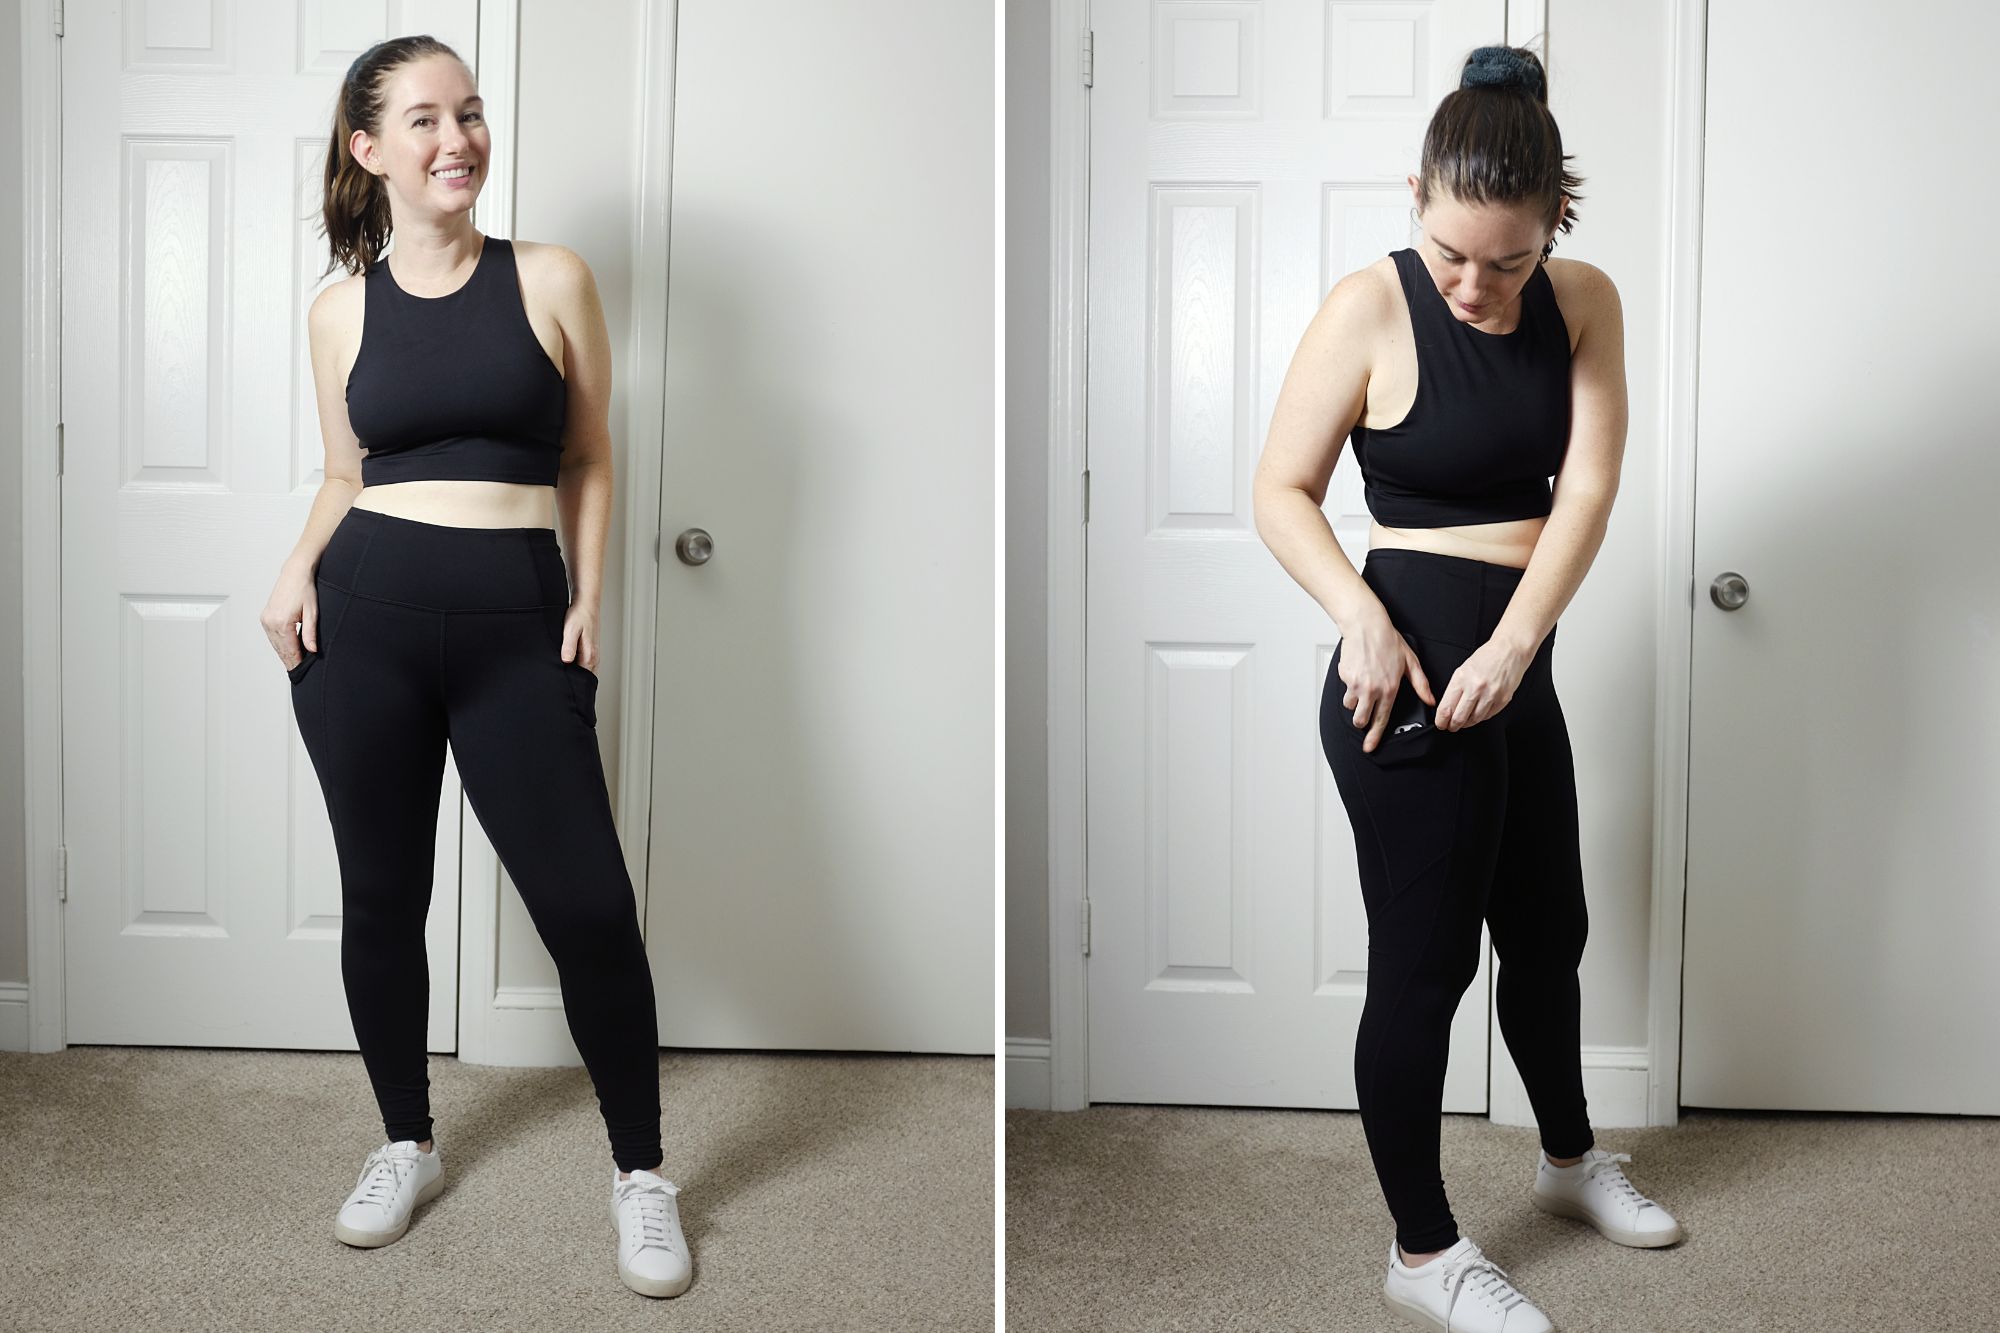 Alyssa wears the Ultra-Soft Performance Pocket Legging from Quince in two photos and shows a phone in the pocket